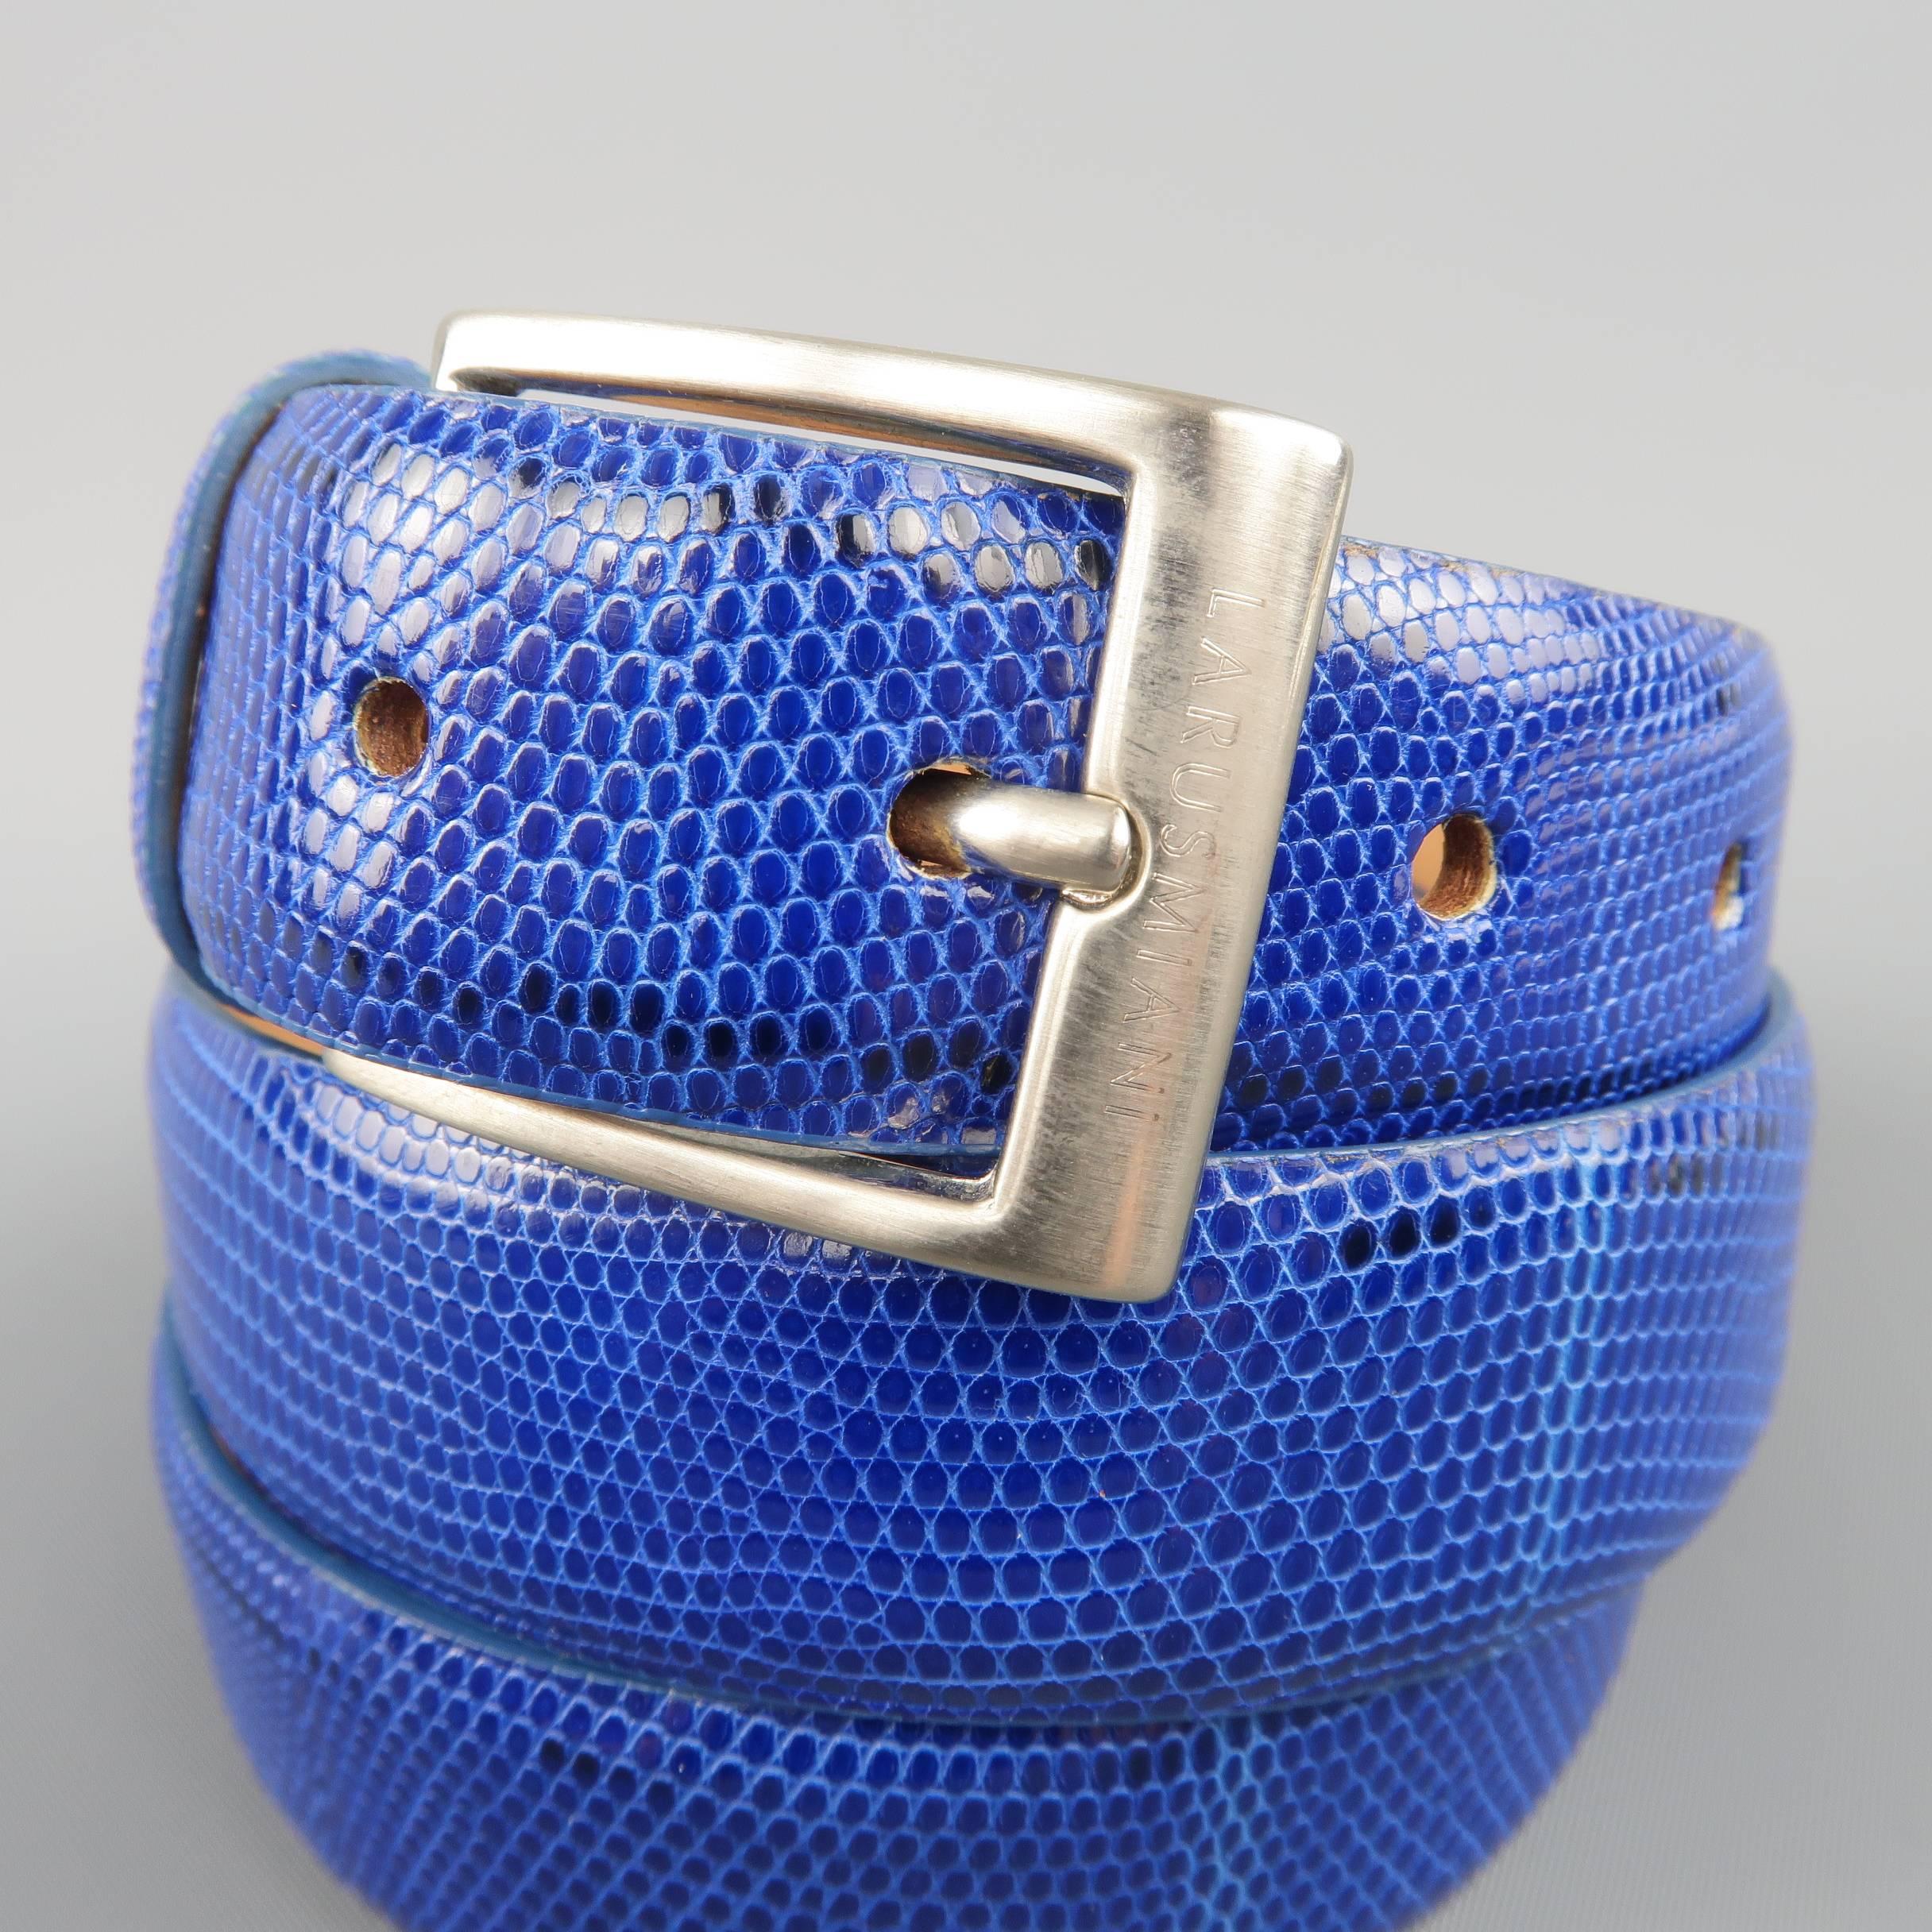 LARUSMIANI dress belt features a royal blue lizard textured leather strap with tan suede liner and matte silver tone brass square buckle. Made in Italy.
 
Good Pre-Owned Condition.
Marked: 95/110
 
Measurements:
 
Length: 43 in.
Width: 1 in.
Fits: